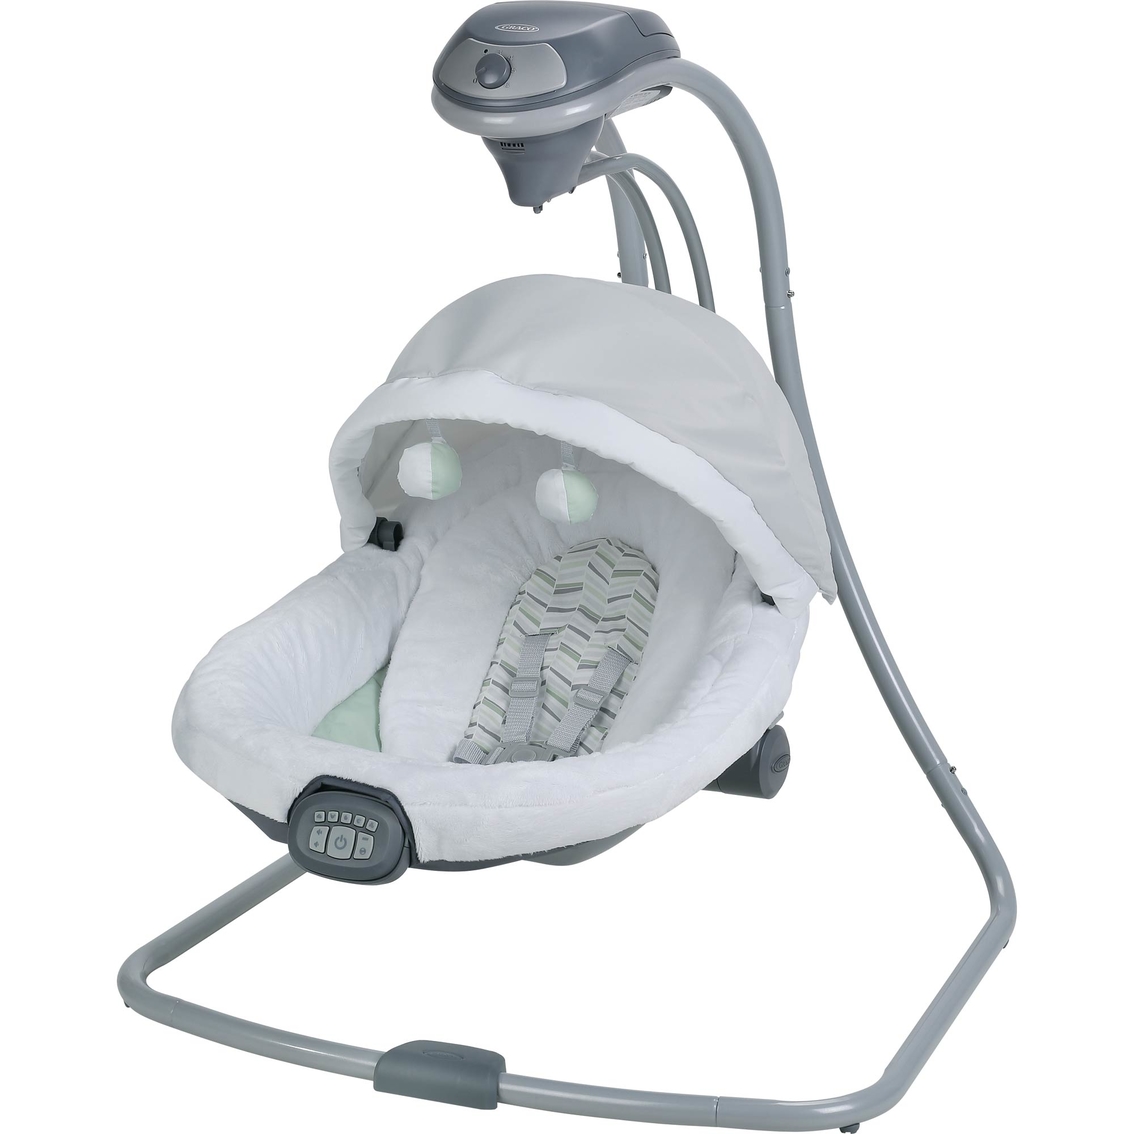 graco oasis swing with soothe surround technology